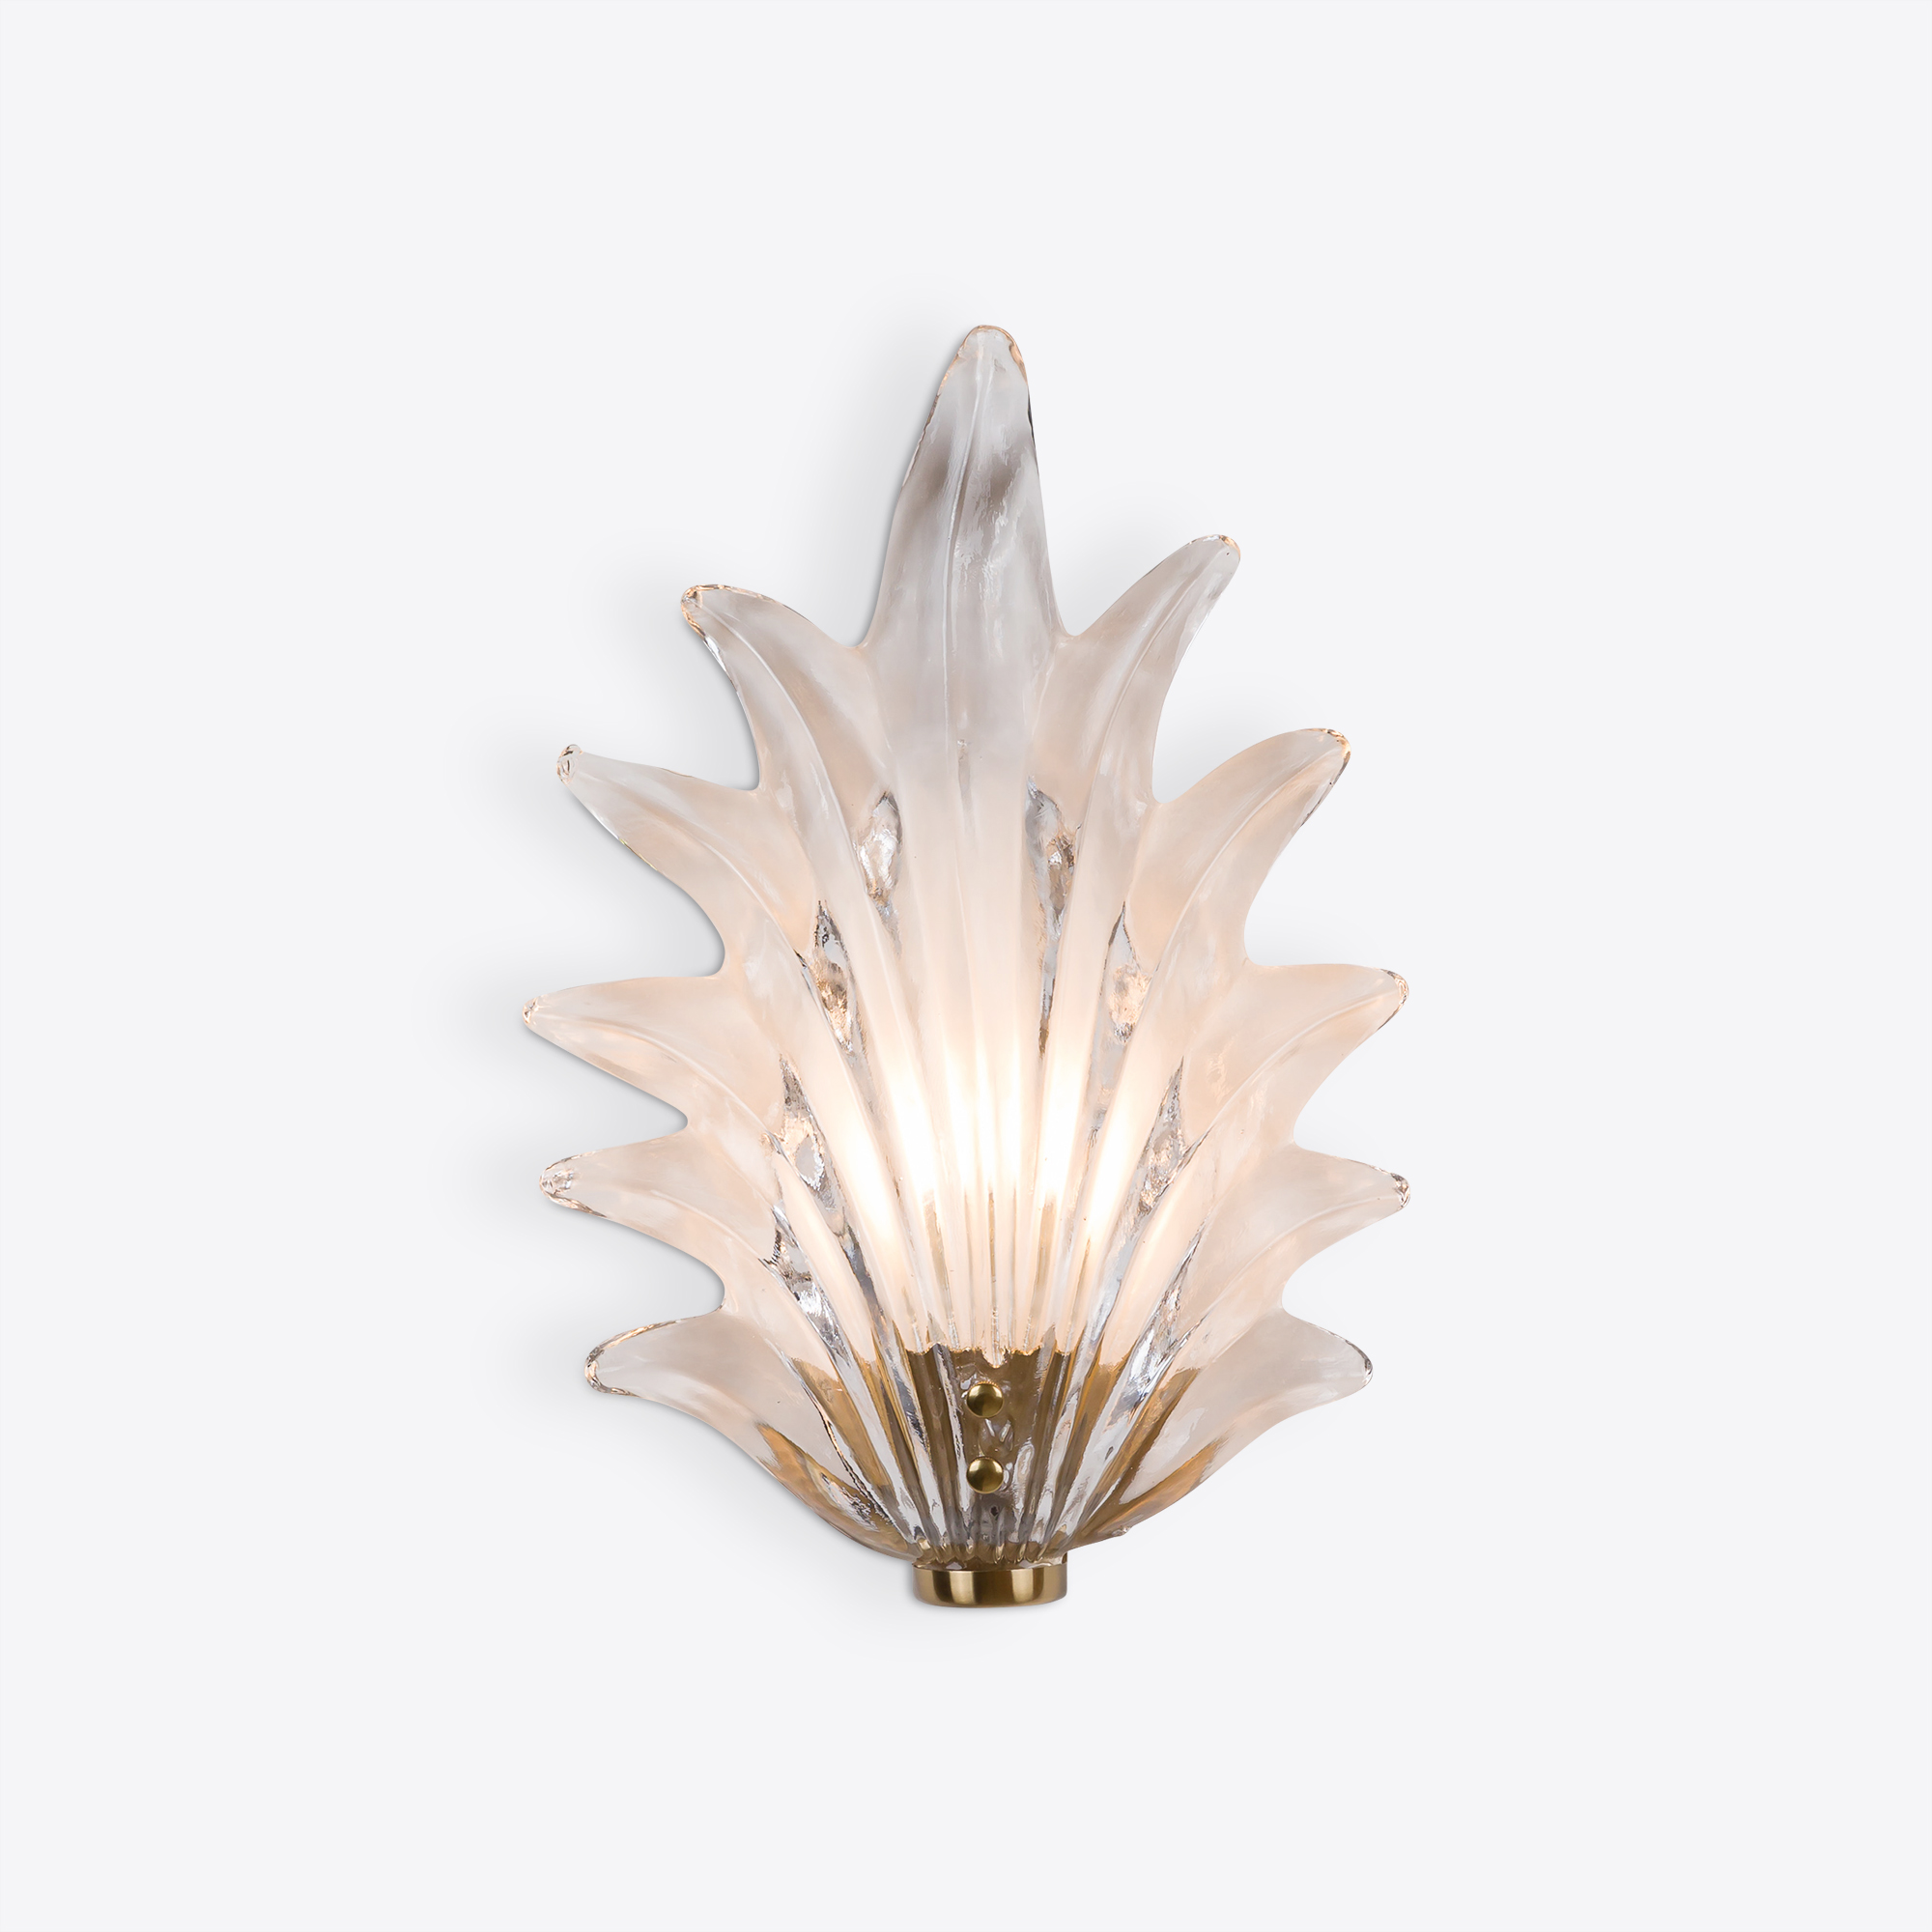 Fiore wall light - a flower design sconce suitable for bathroom use